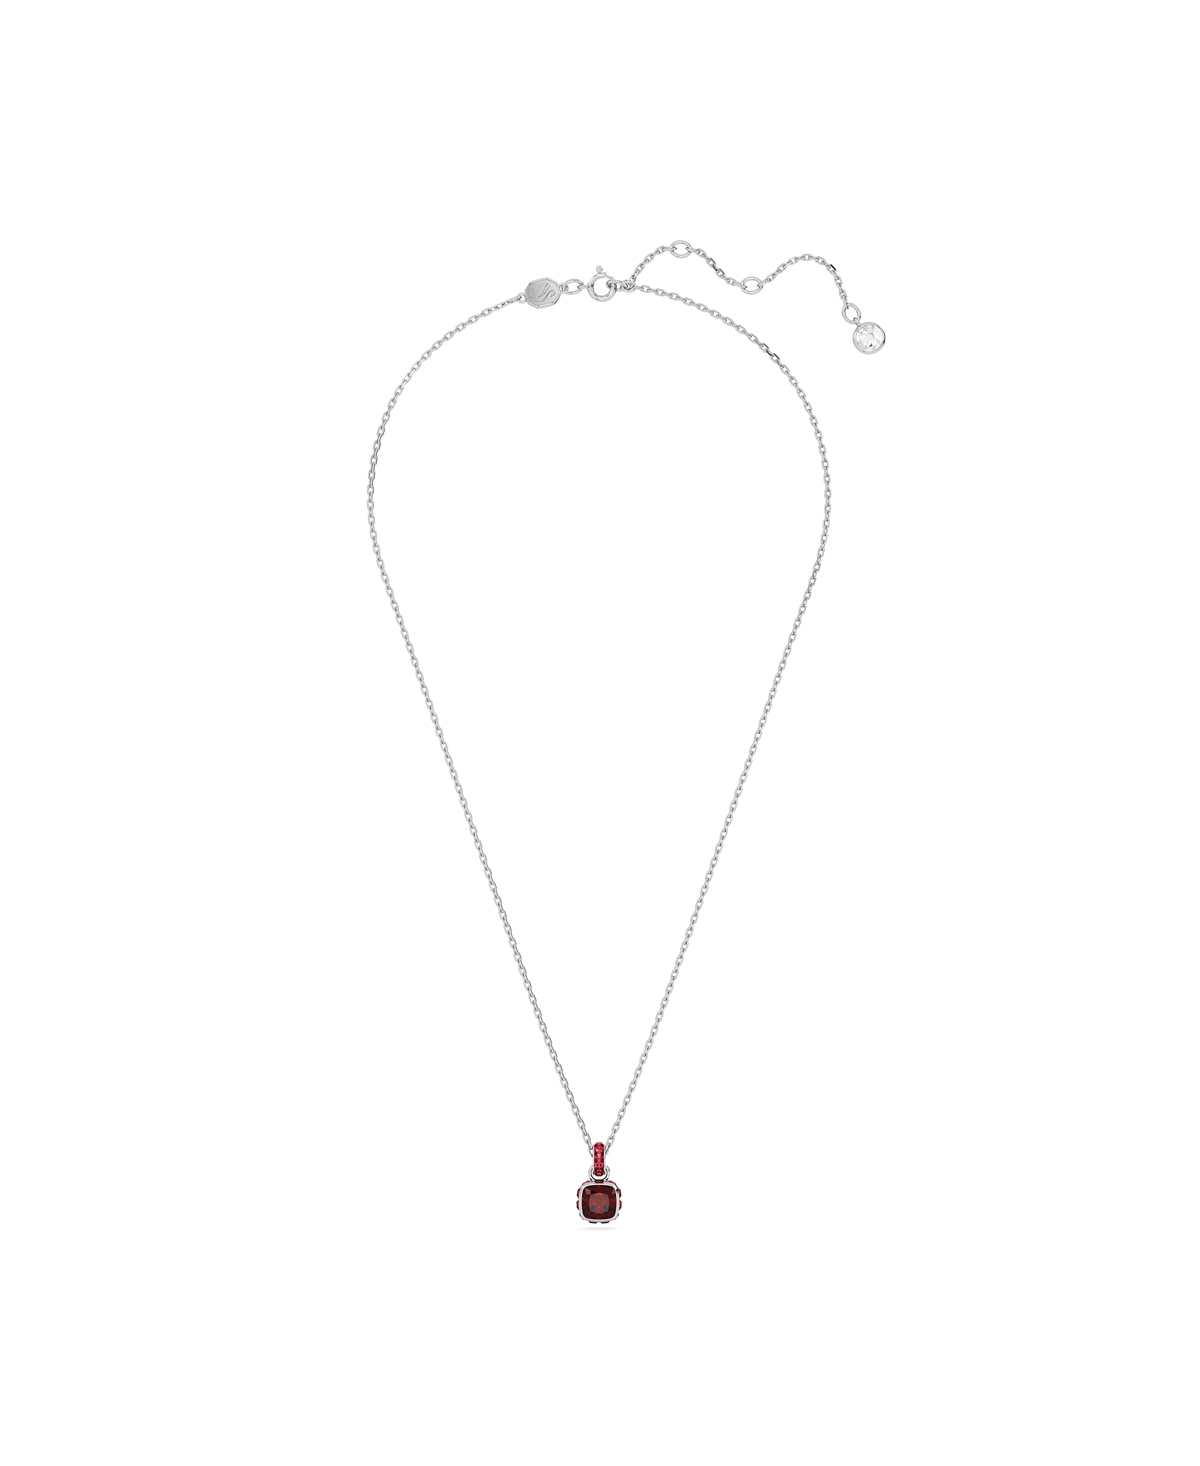 Swarovski Rhodium Plated Square Cut Color Birthstone Pendant Necklace In January,red